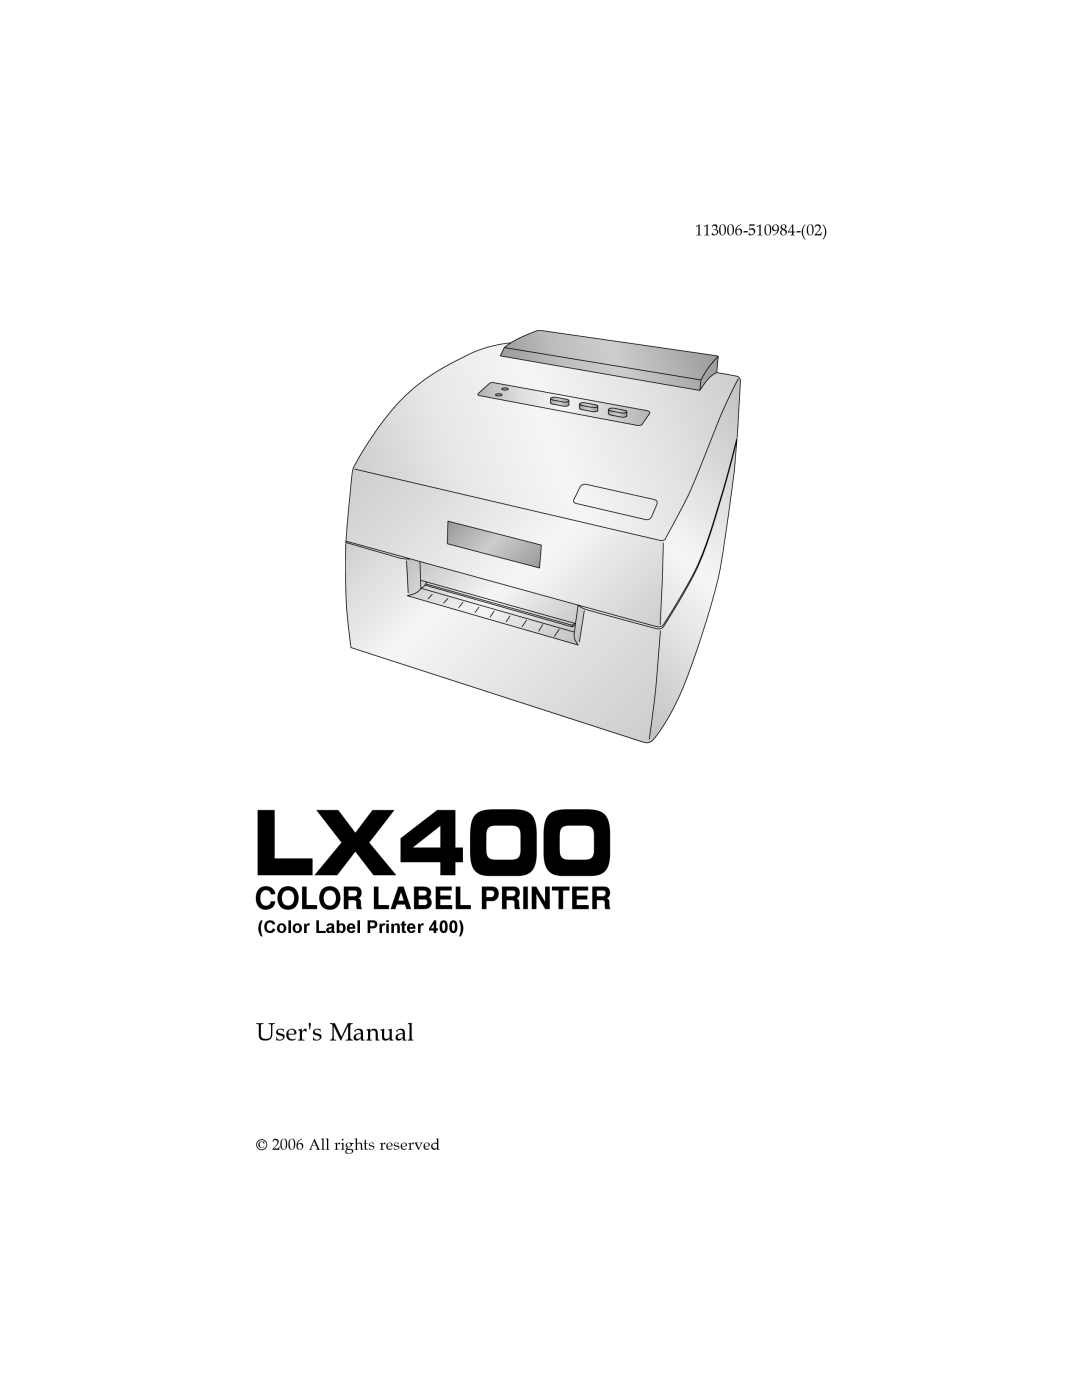 Primera Technology LX400 user manual Color Label Printer, Users Manual, 113006-510984-02, All rights reserved 